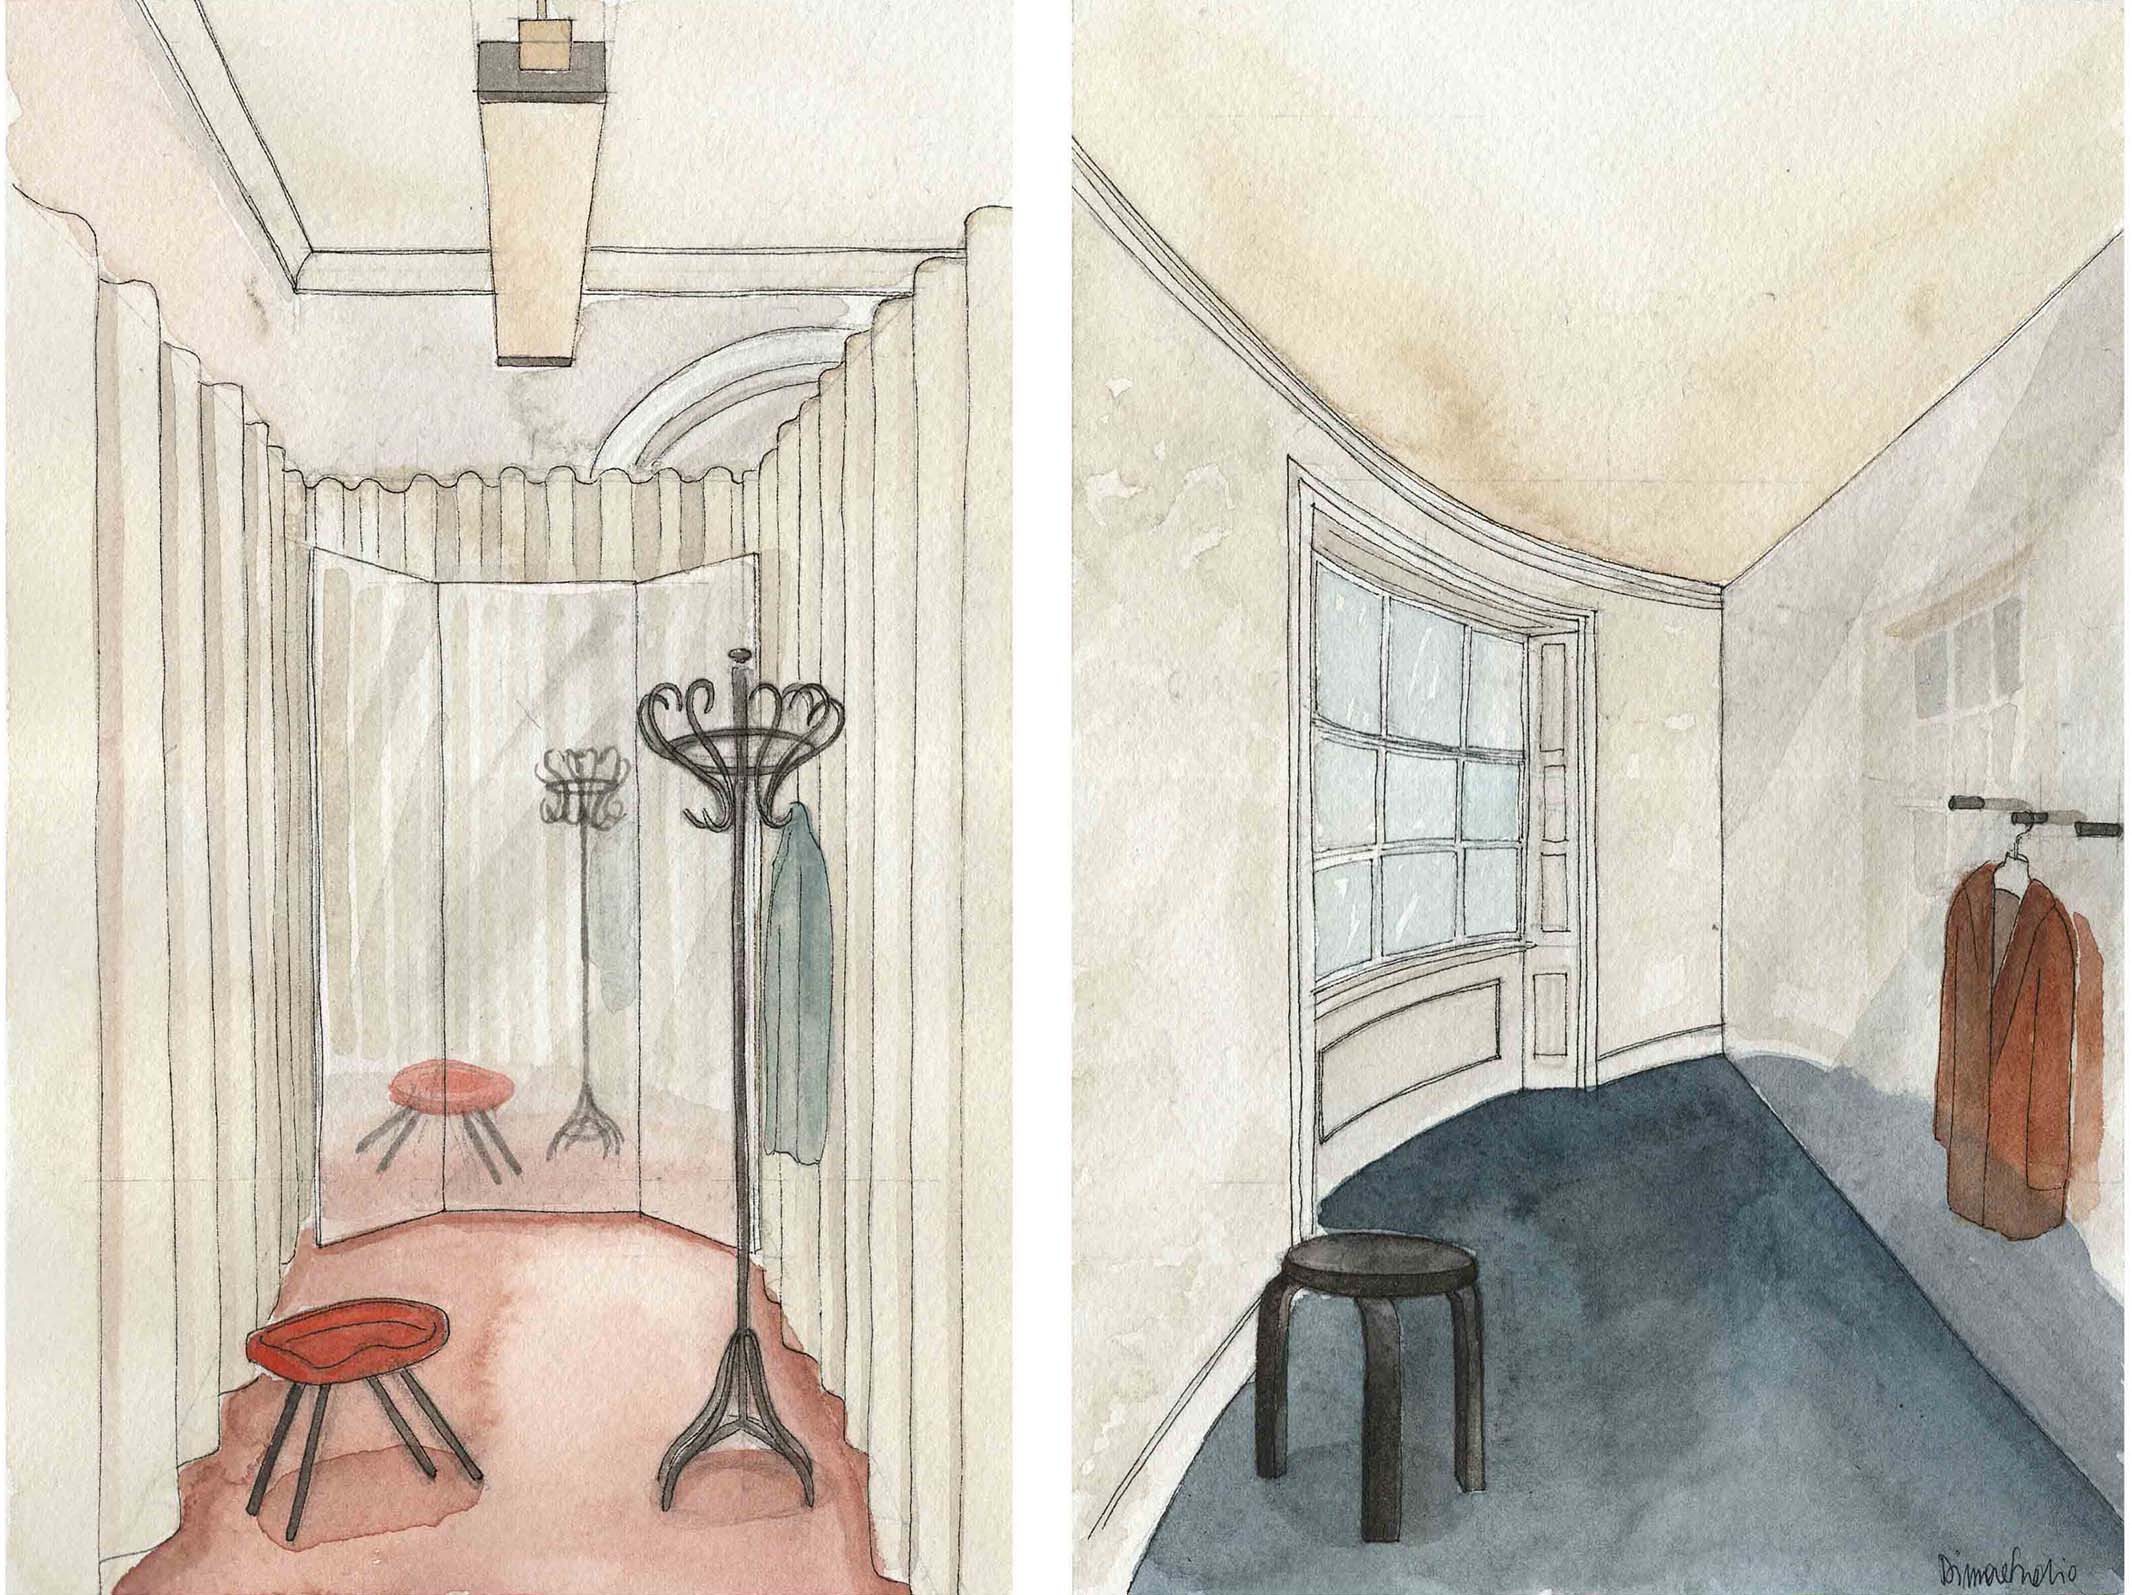 Designing Dreams With Dimorestudio Sketches of Browns Brook Street Store